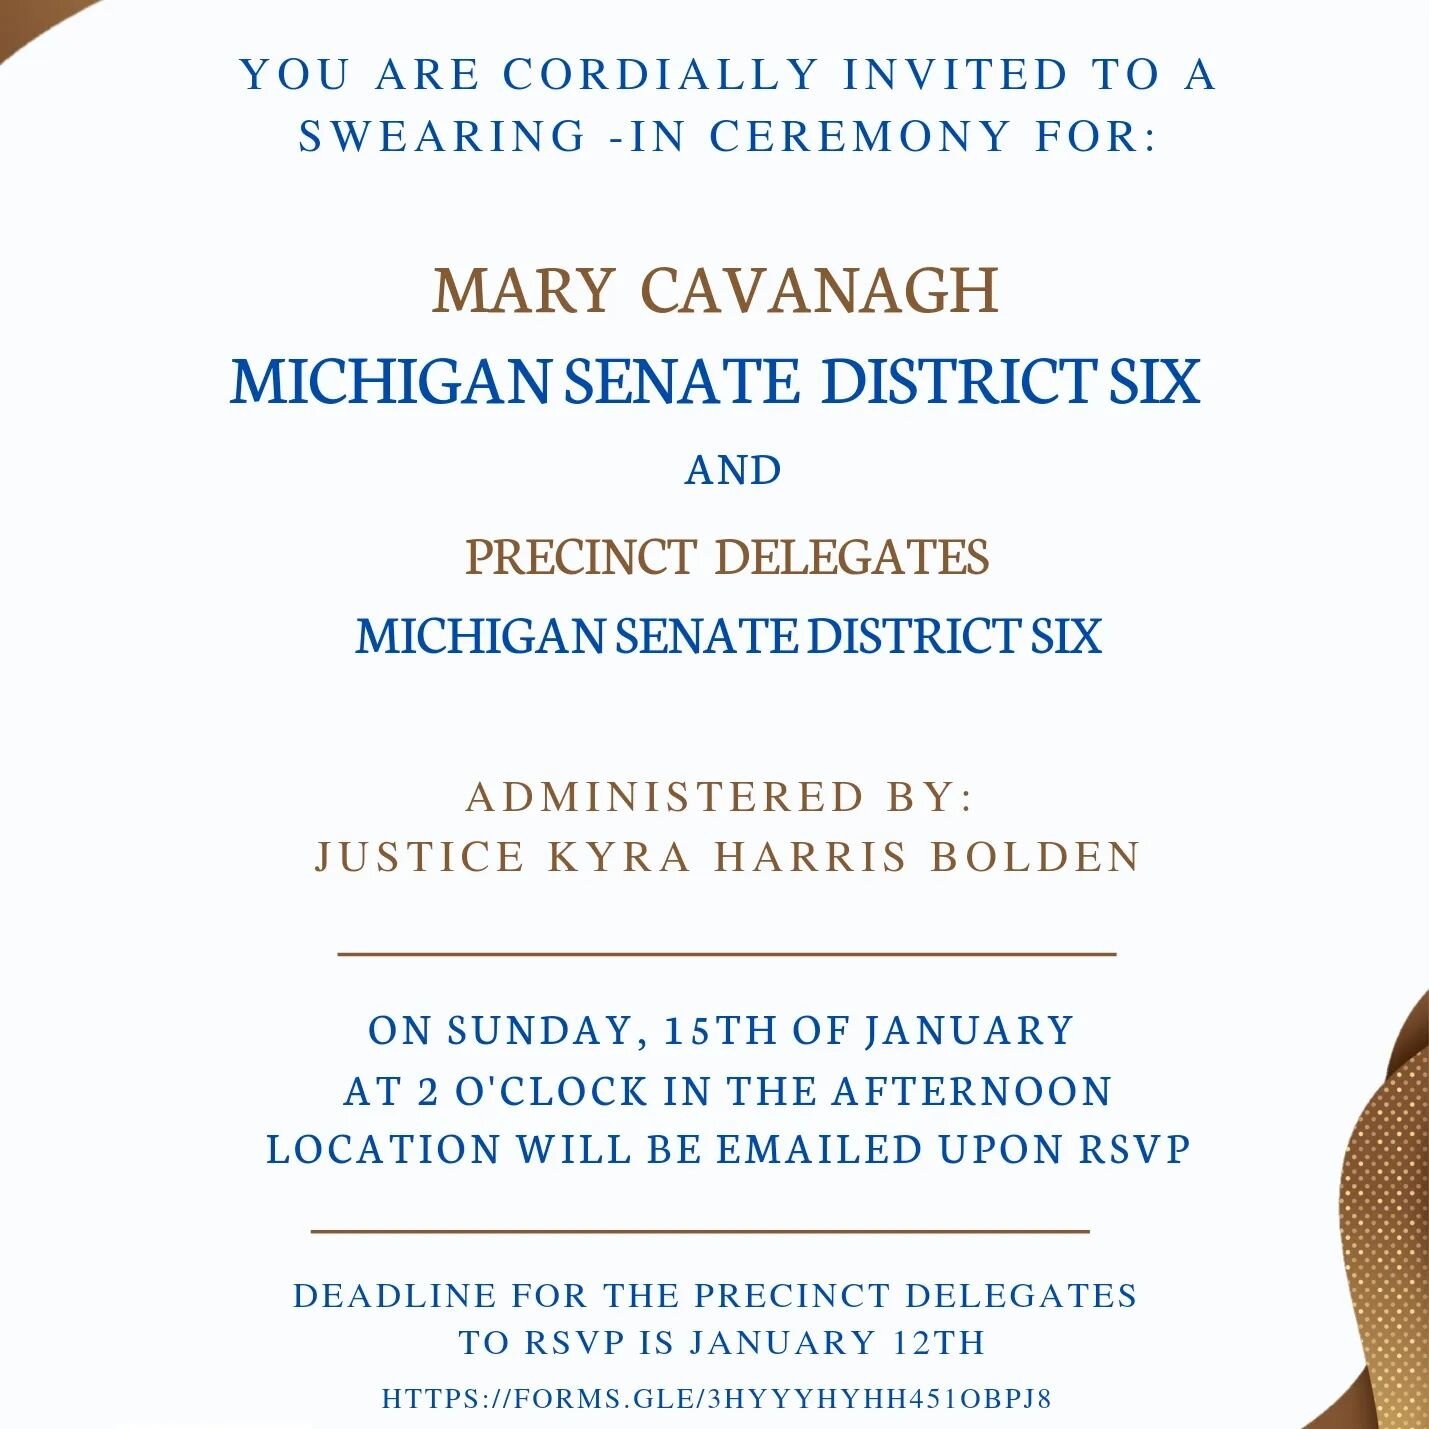 Calling all 6th Senate District Precinct delegates (includes Redford, Farmington, &amp; parts of Livonia, NW Detroit, &amp; Farmington Hills)!! When I say #TogetherWeWin , I mean it! Join me Sunday, Jan 15th for a swearing in ceremony for Precinct De